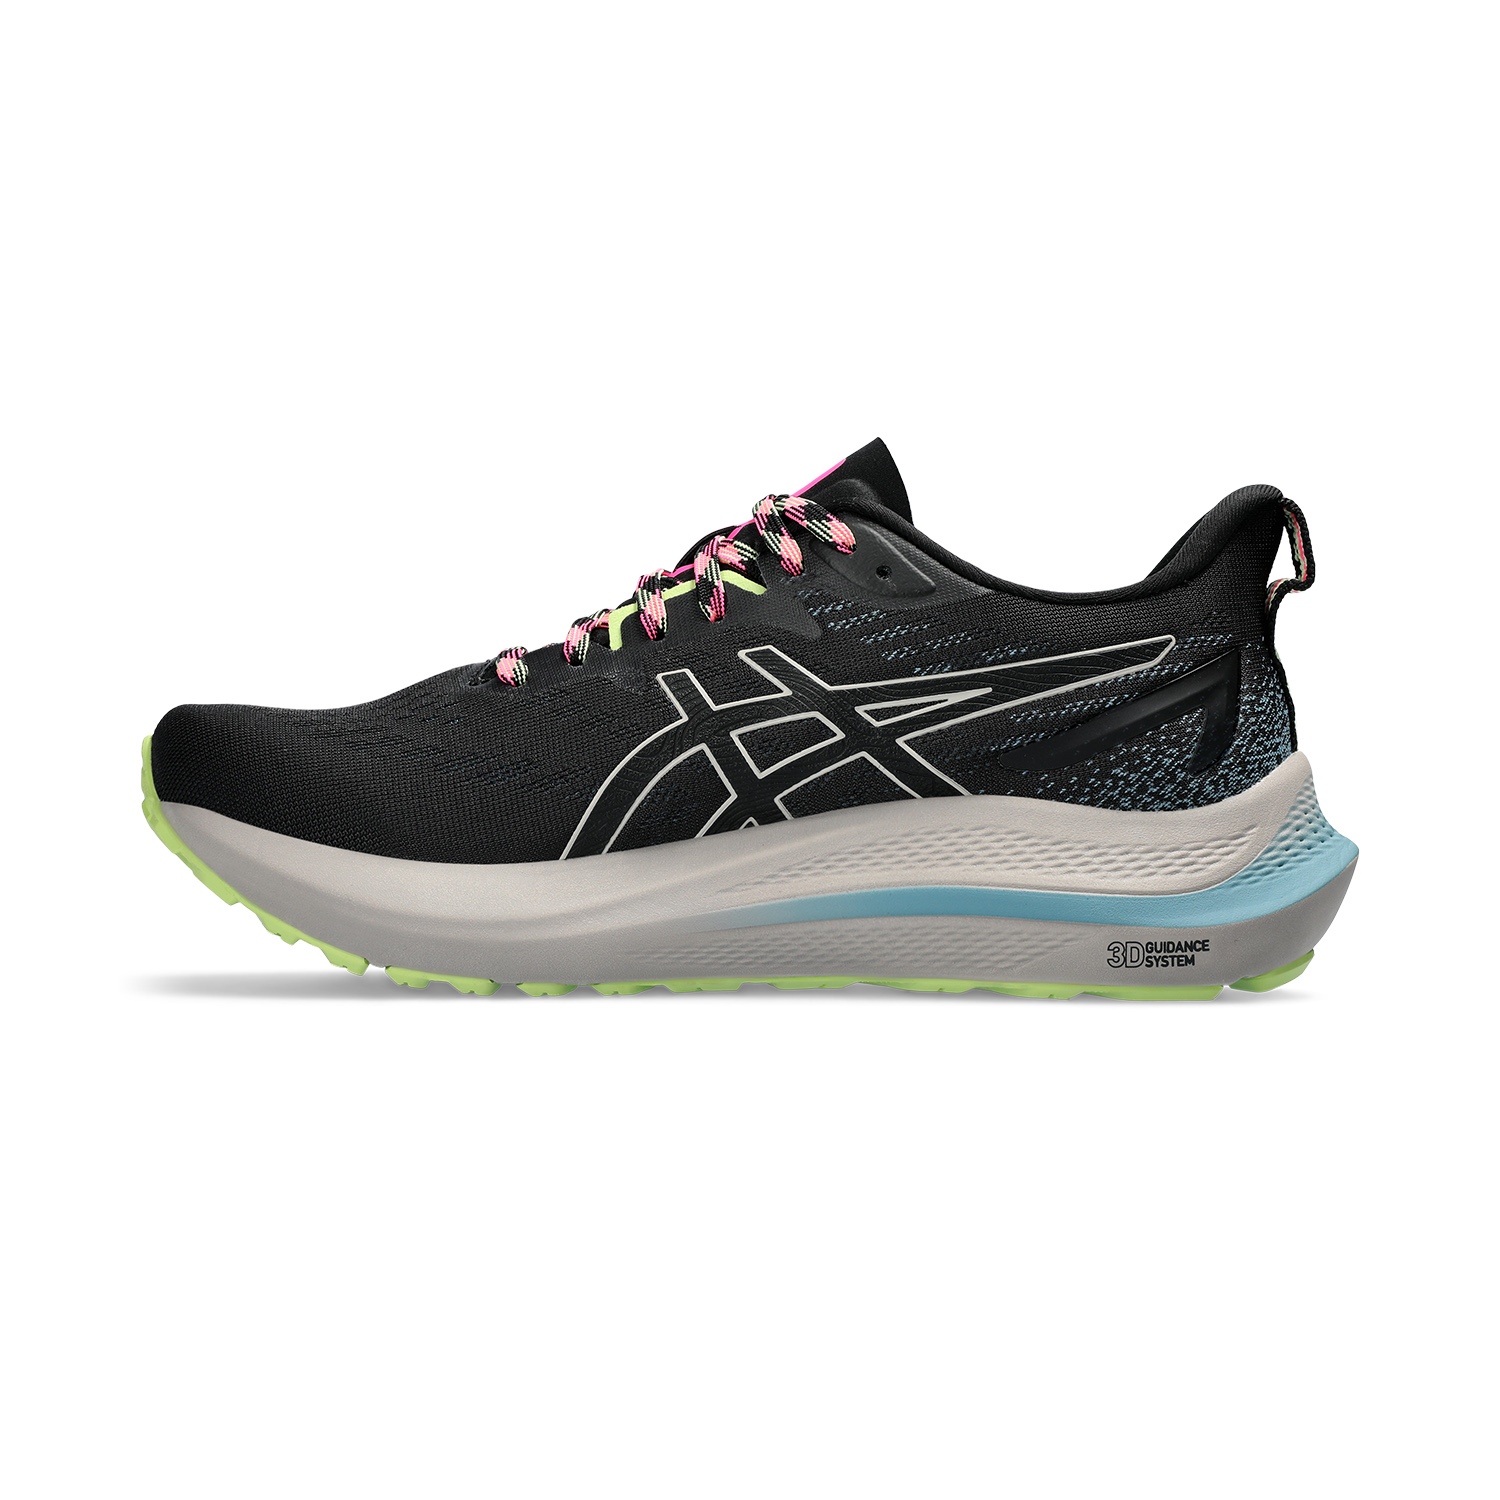 Asics GT 2000 12 TR - Nature Bathing/Lime Green